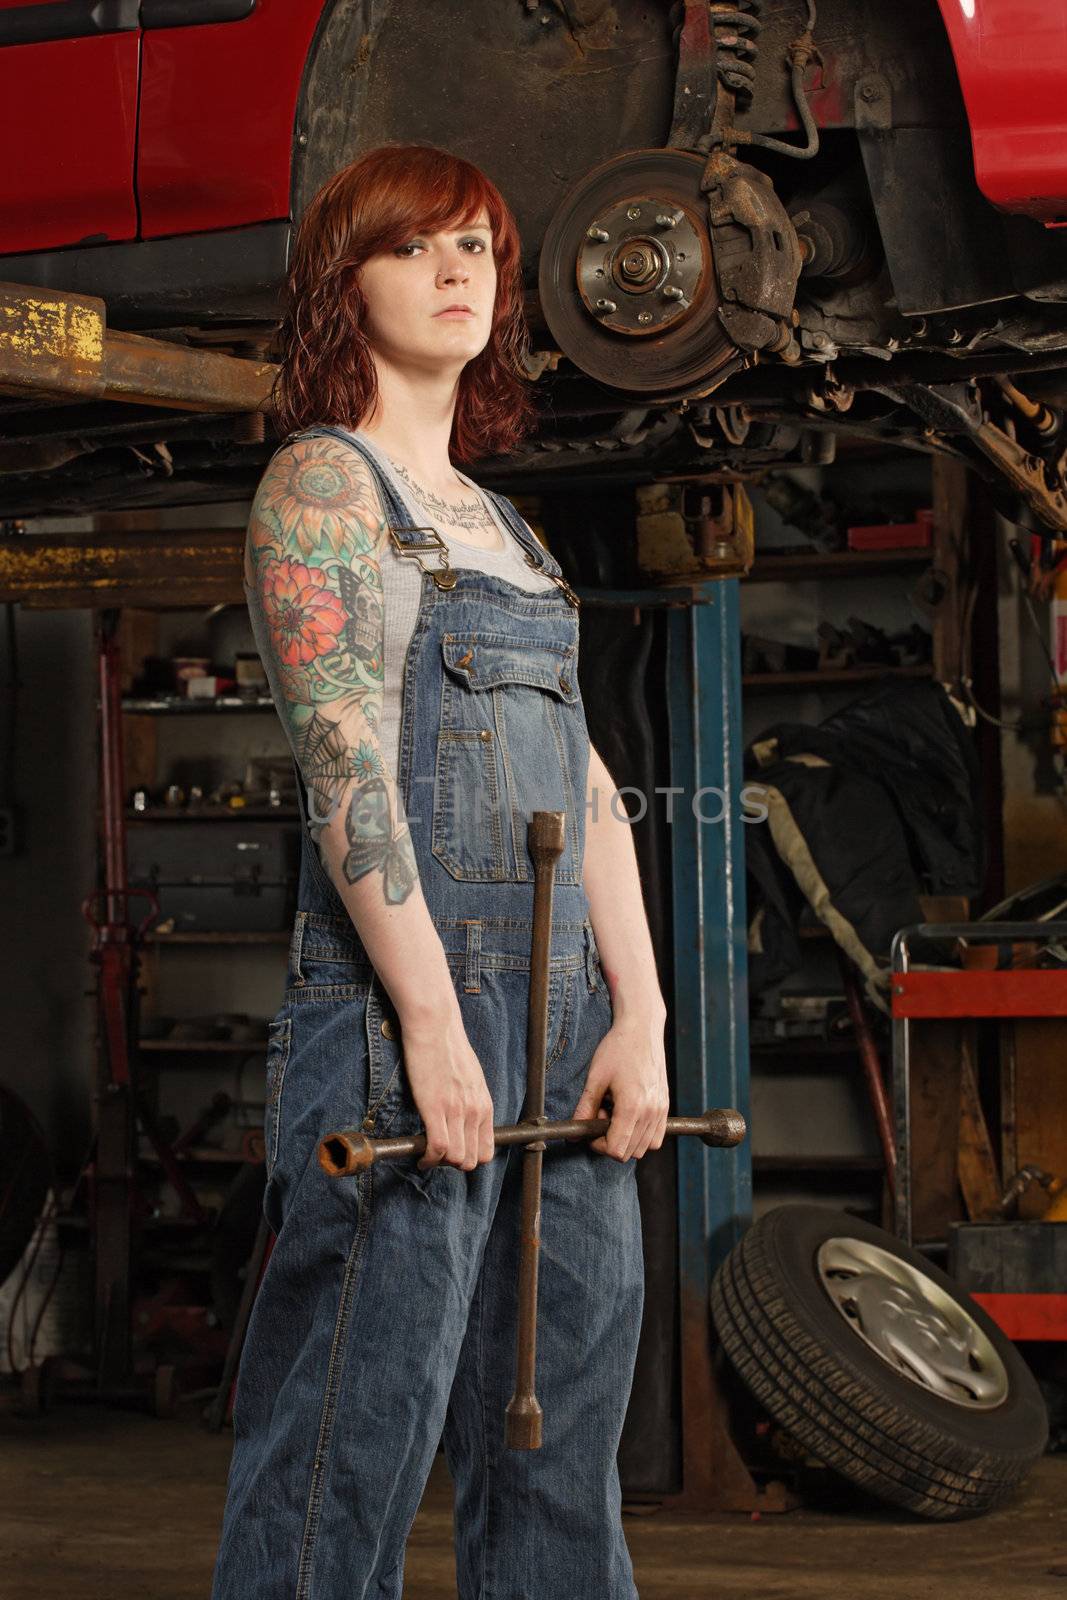 Photo of a young beautiful redhead mechanic wearing overalls and holding a huge wrench.  Attached property release is for arm tattoos.